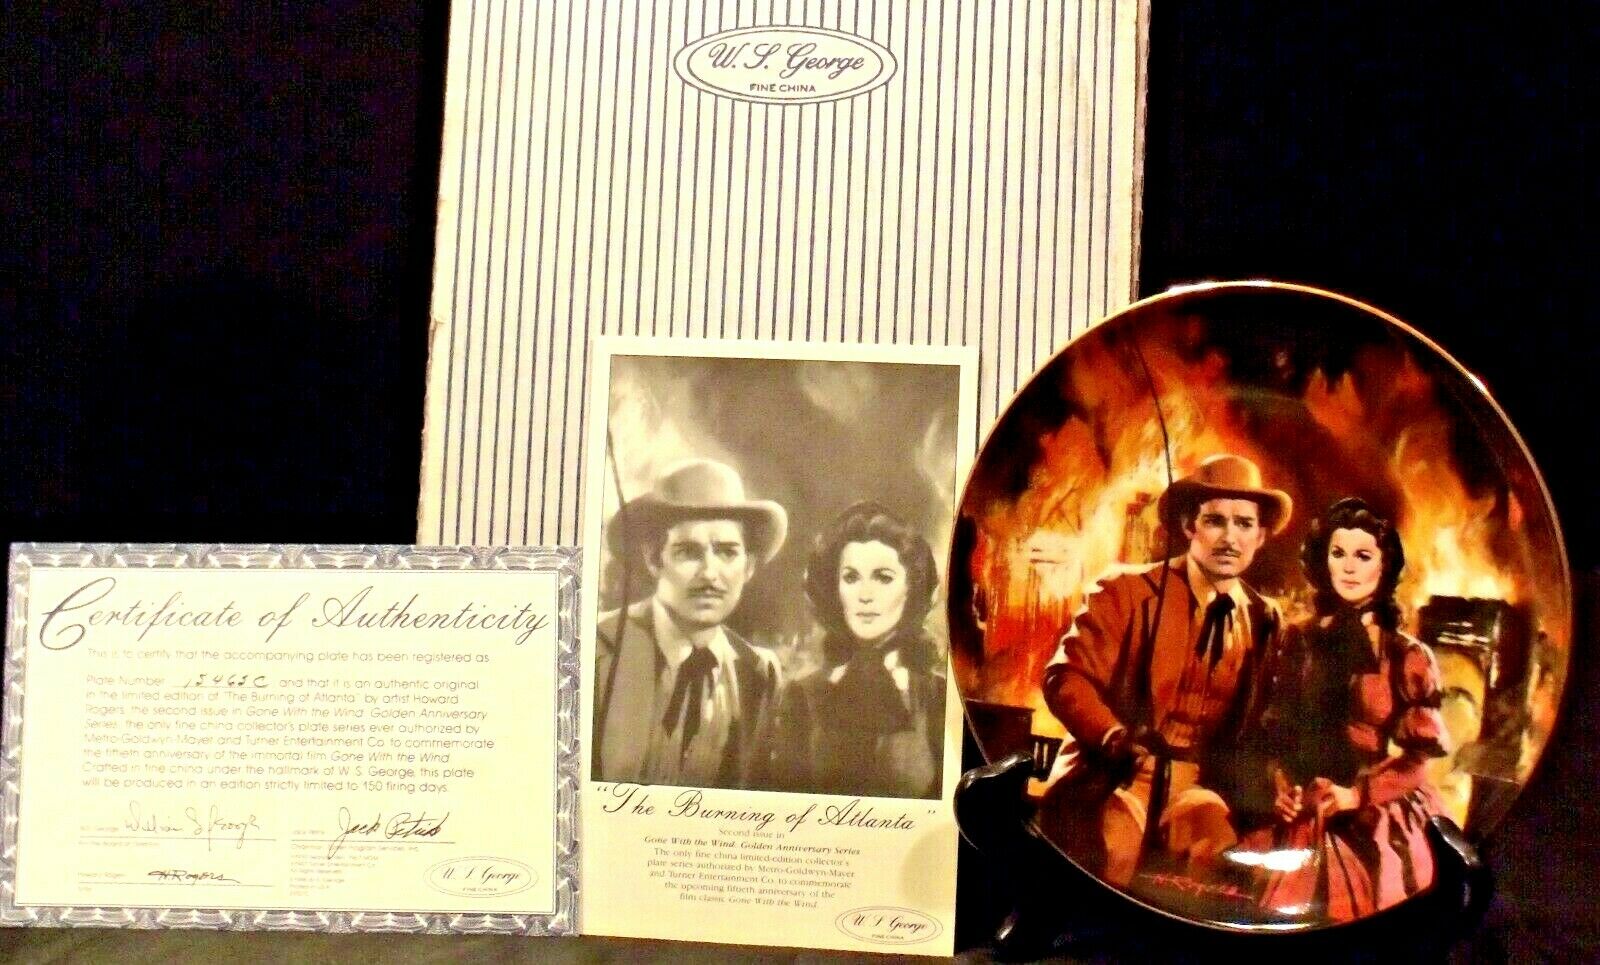 Gone With the Wind golden anniversary the burning of Atlanta commemorative plate